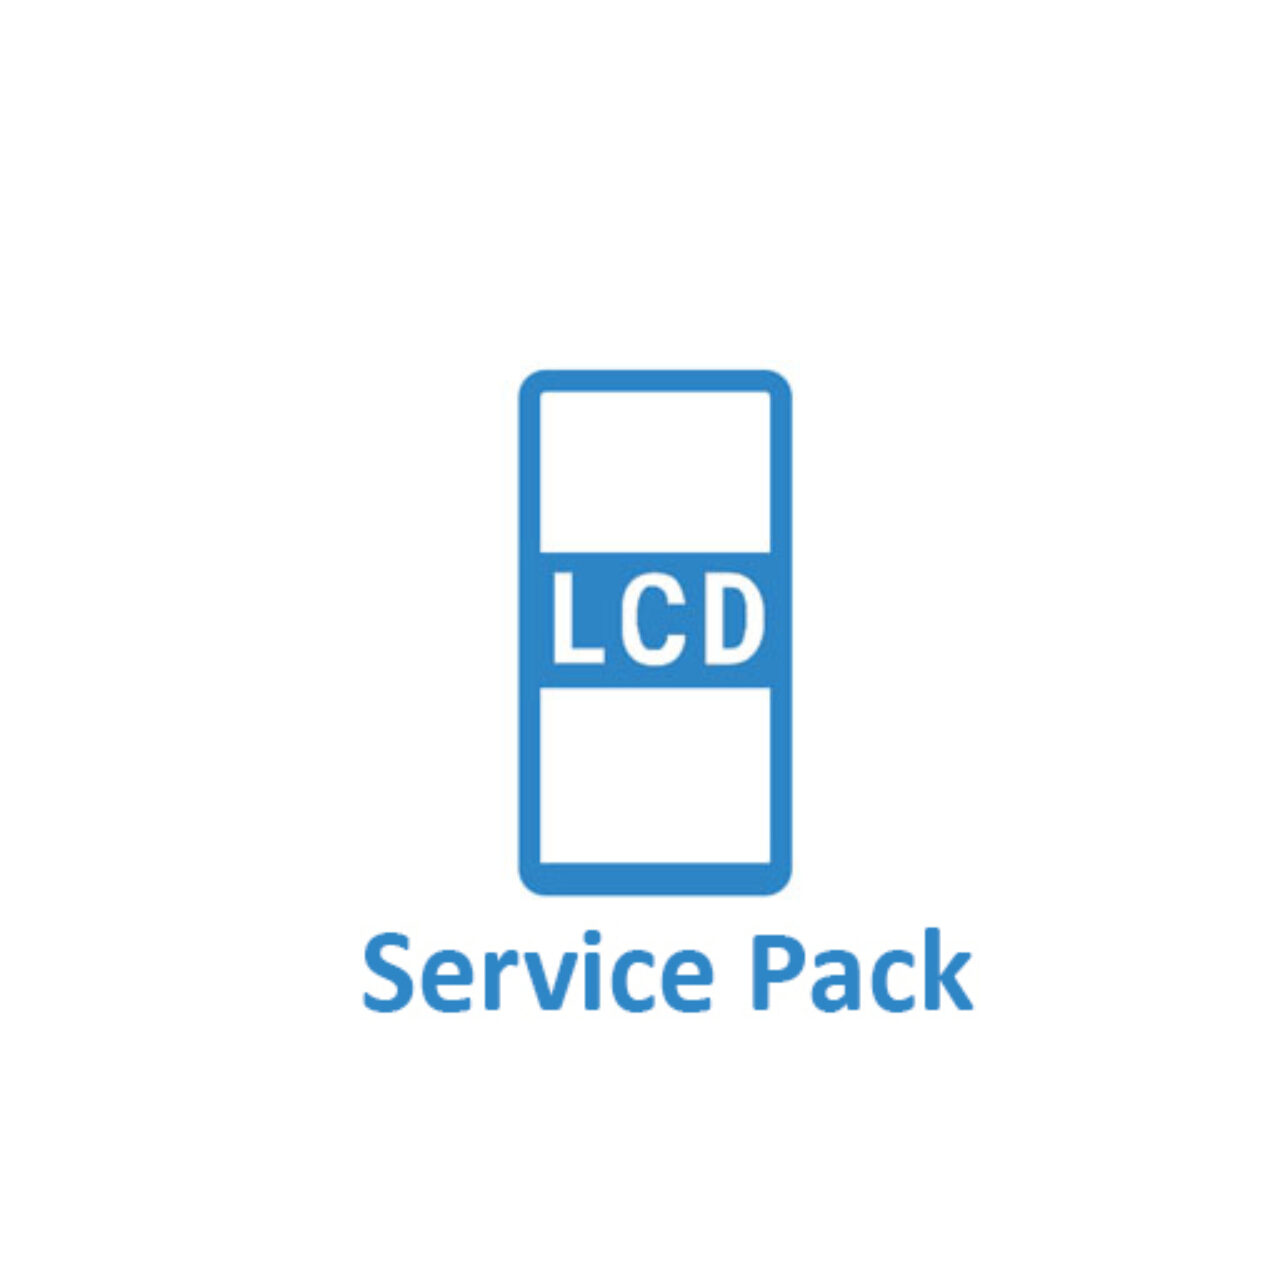 LCD Service Pack